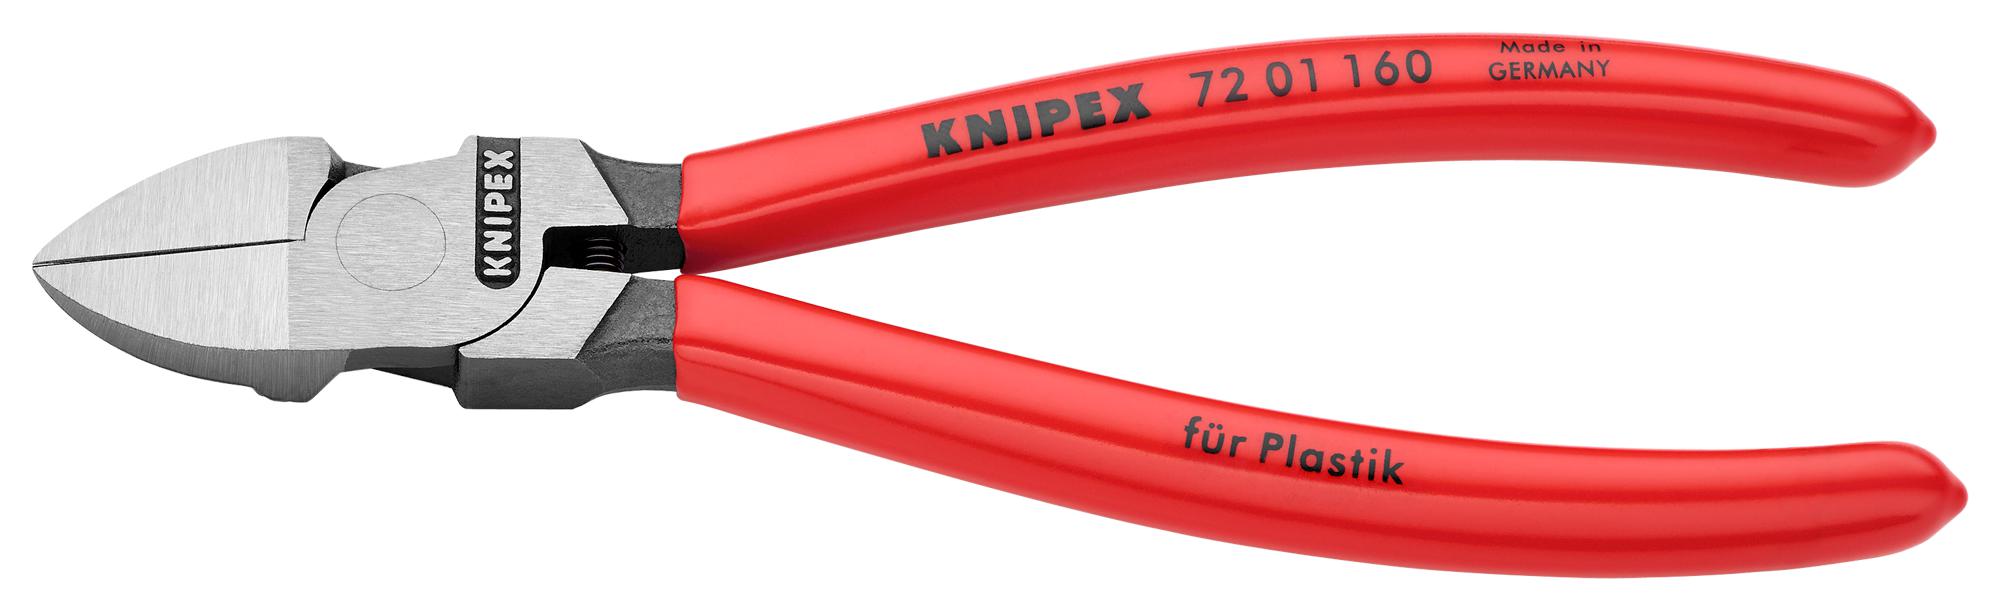 72 01 160 CUTTER, FOR PLASTIC, 160MM KNIPEX